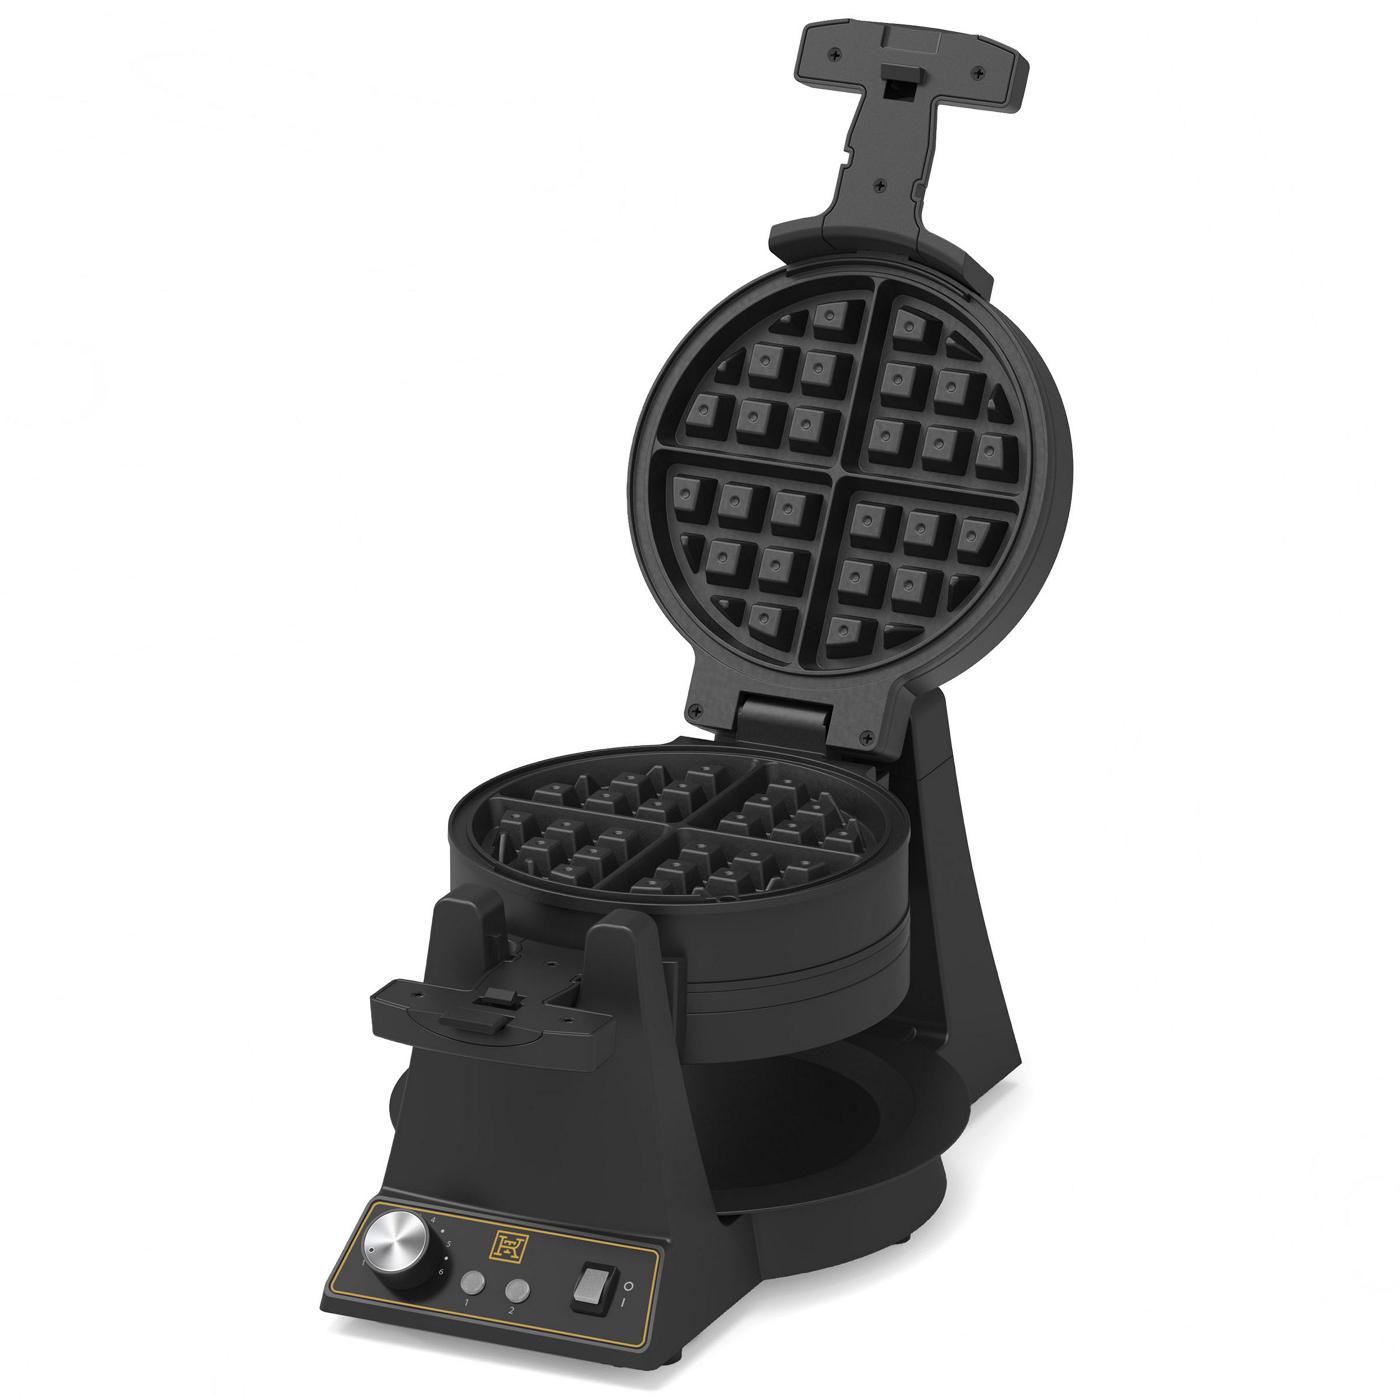 Black and Decker 3 in 1 Waffle Maker - appliances - by owner